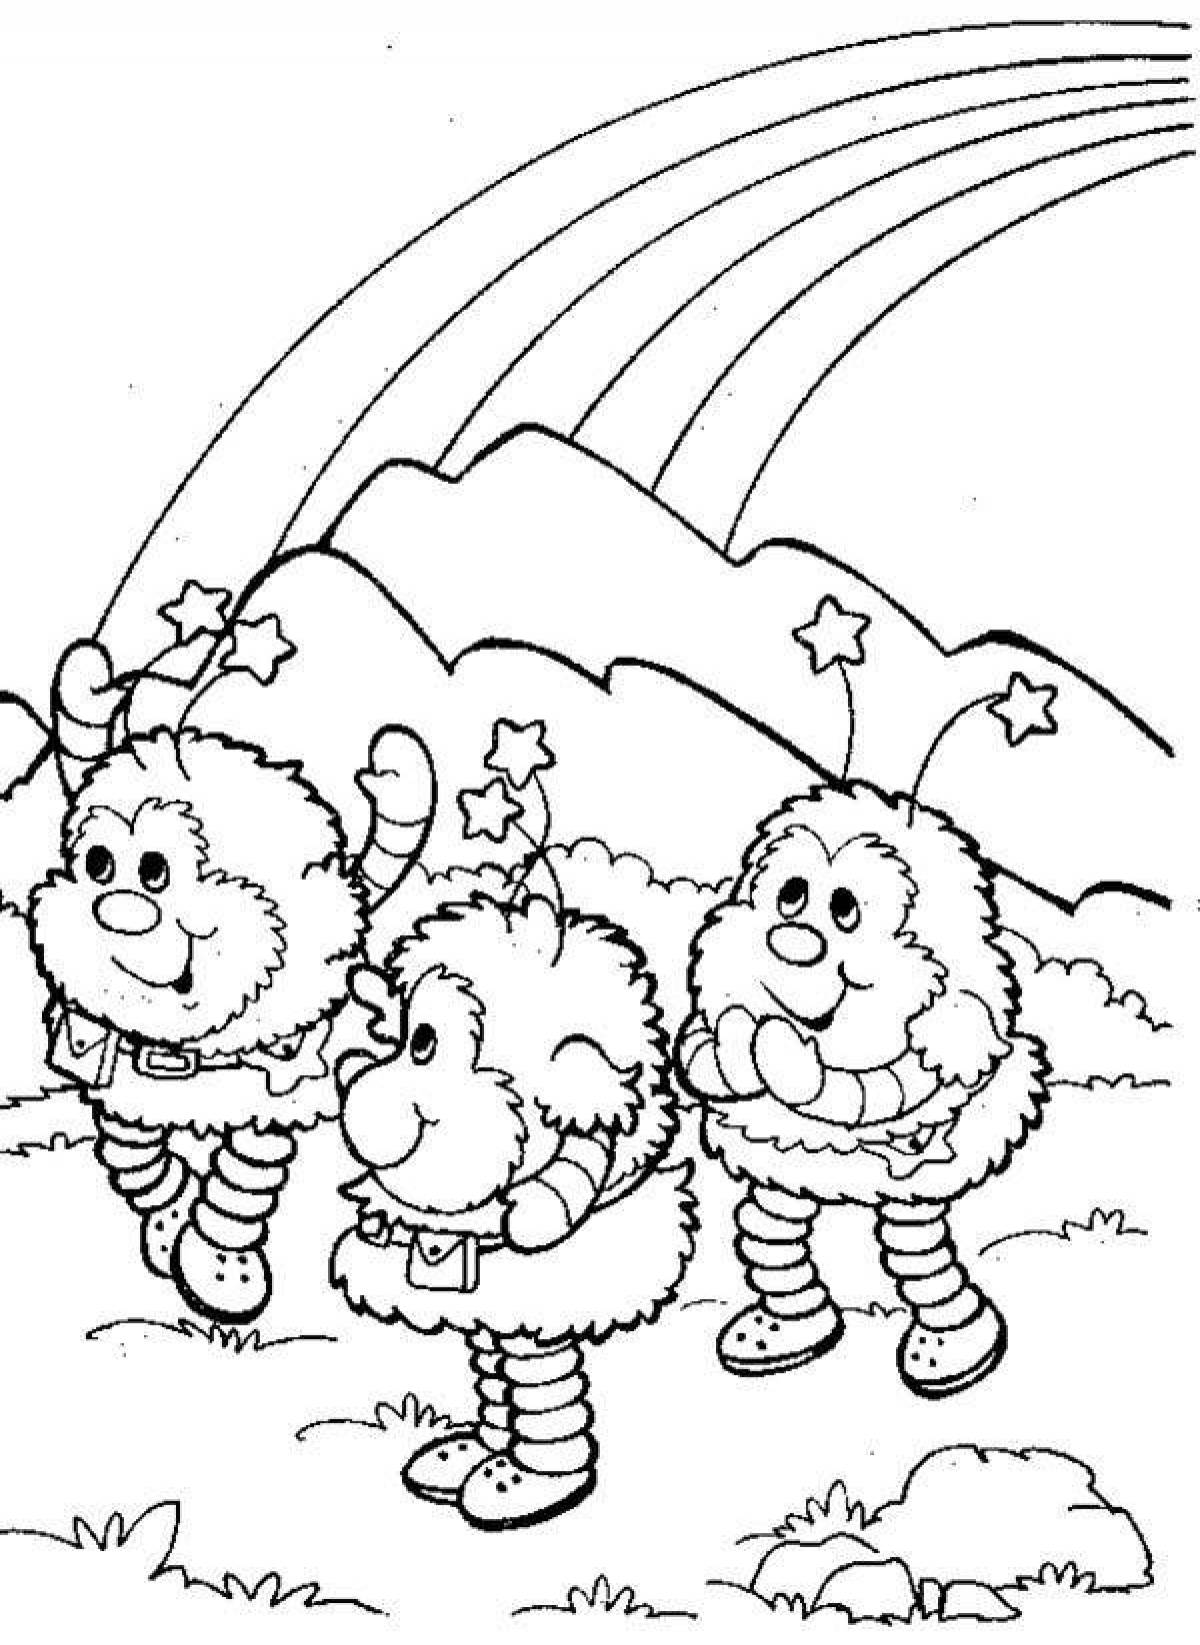 Sunny rainbow friends coloring page